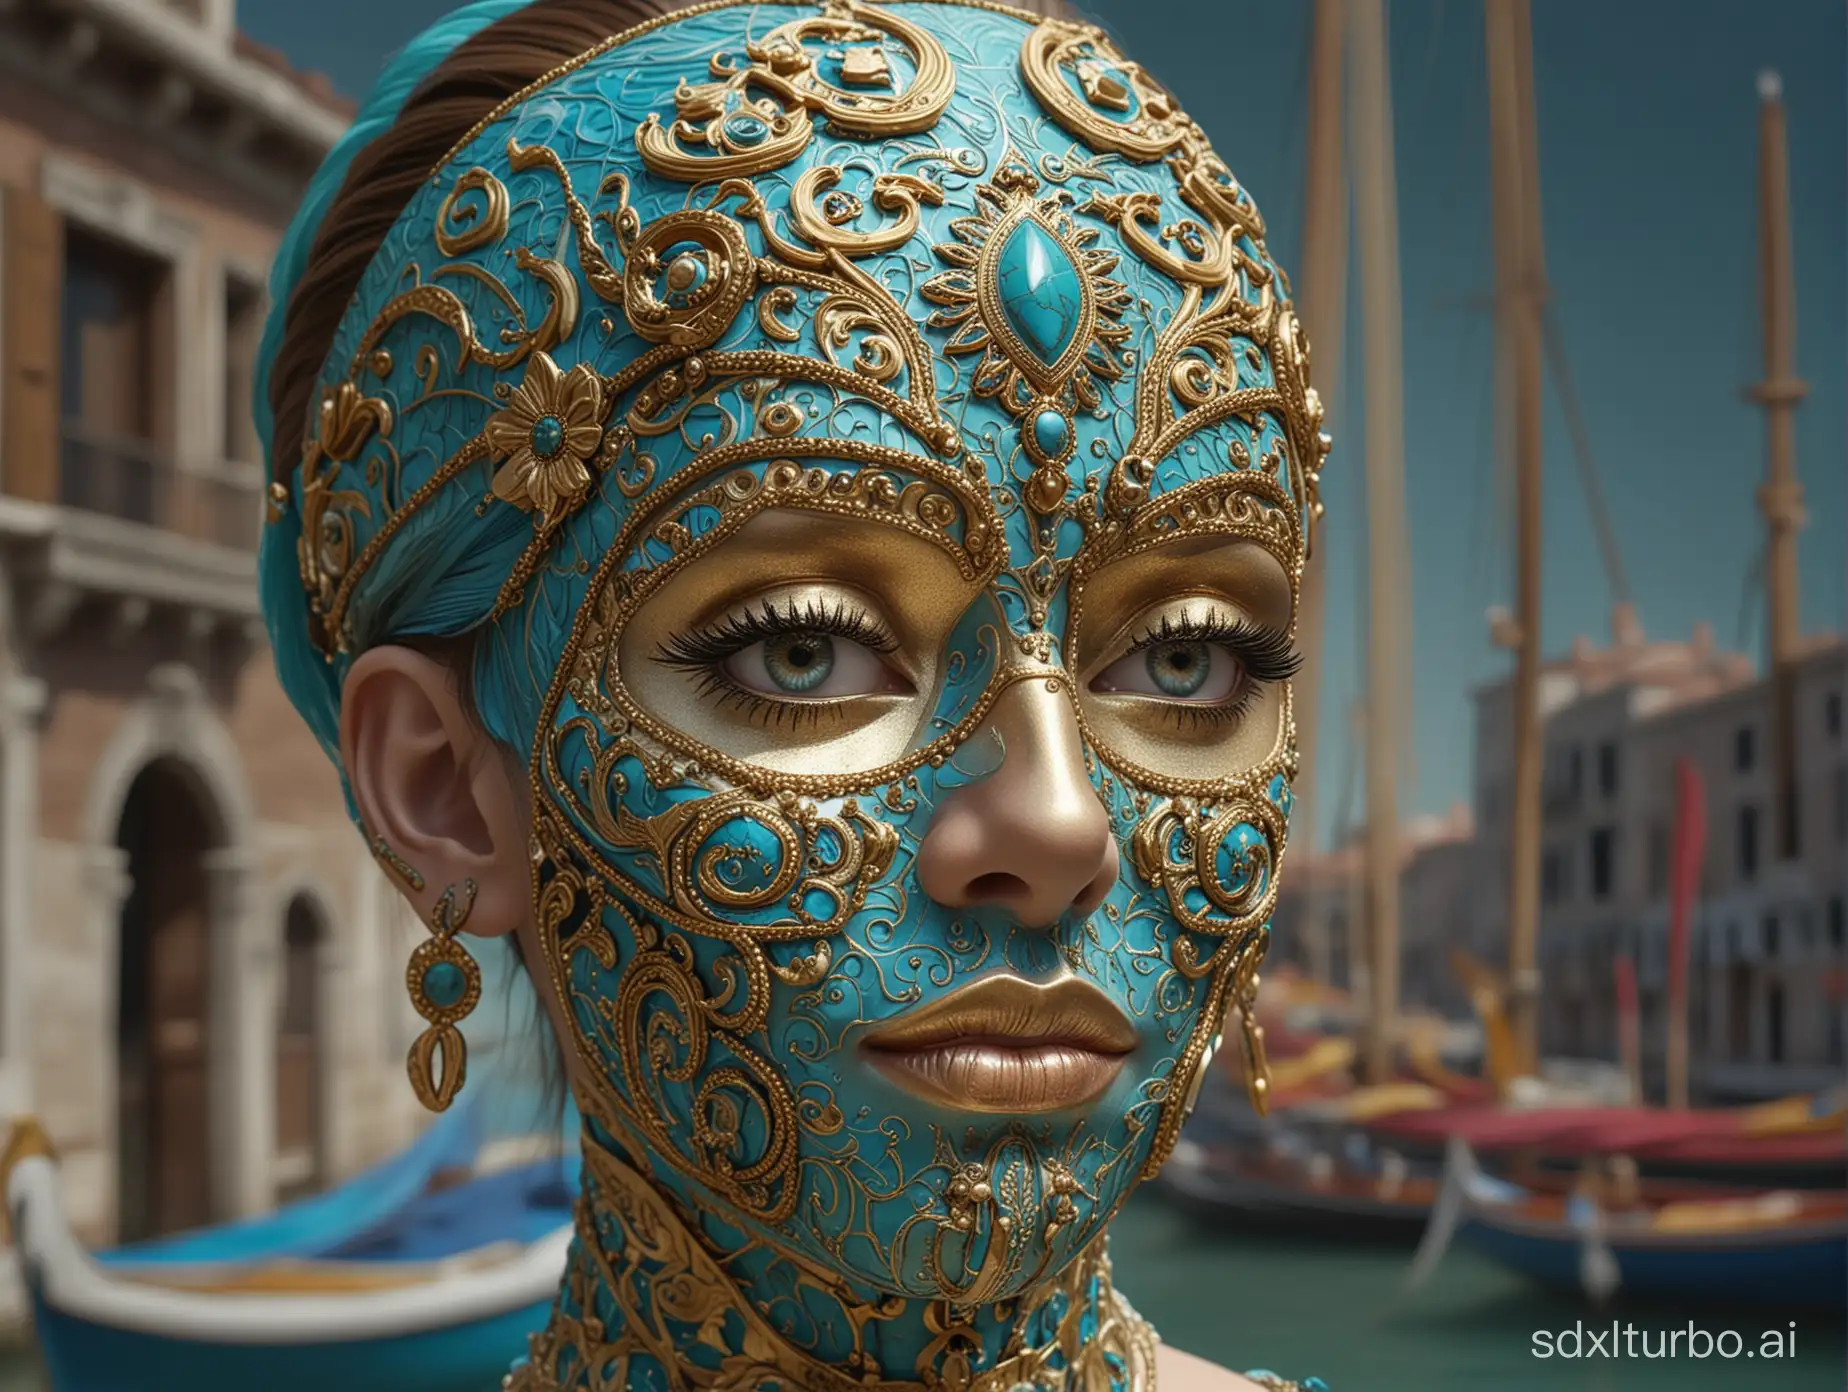 Leo-Messi-Wearing-Elaborate-Mask-Vray-Tracing-Cloisonnism-Impressionistic-Venice-Scenes